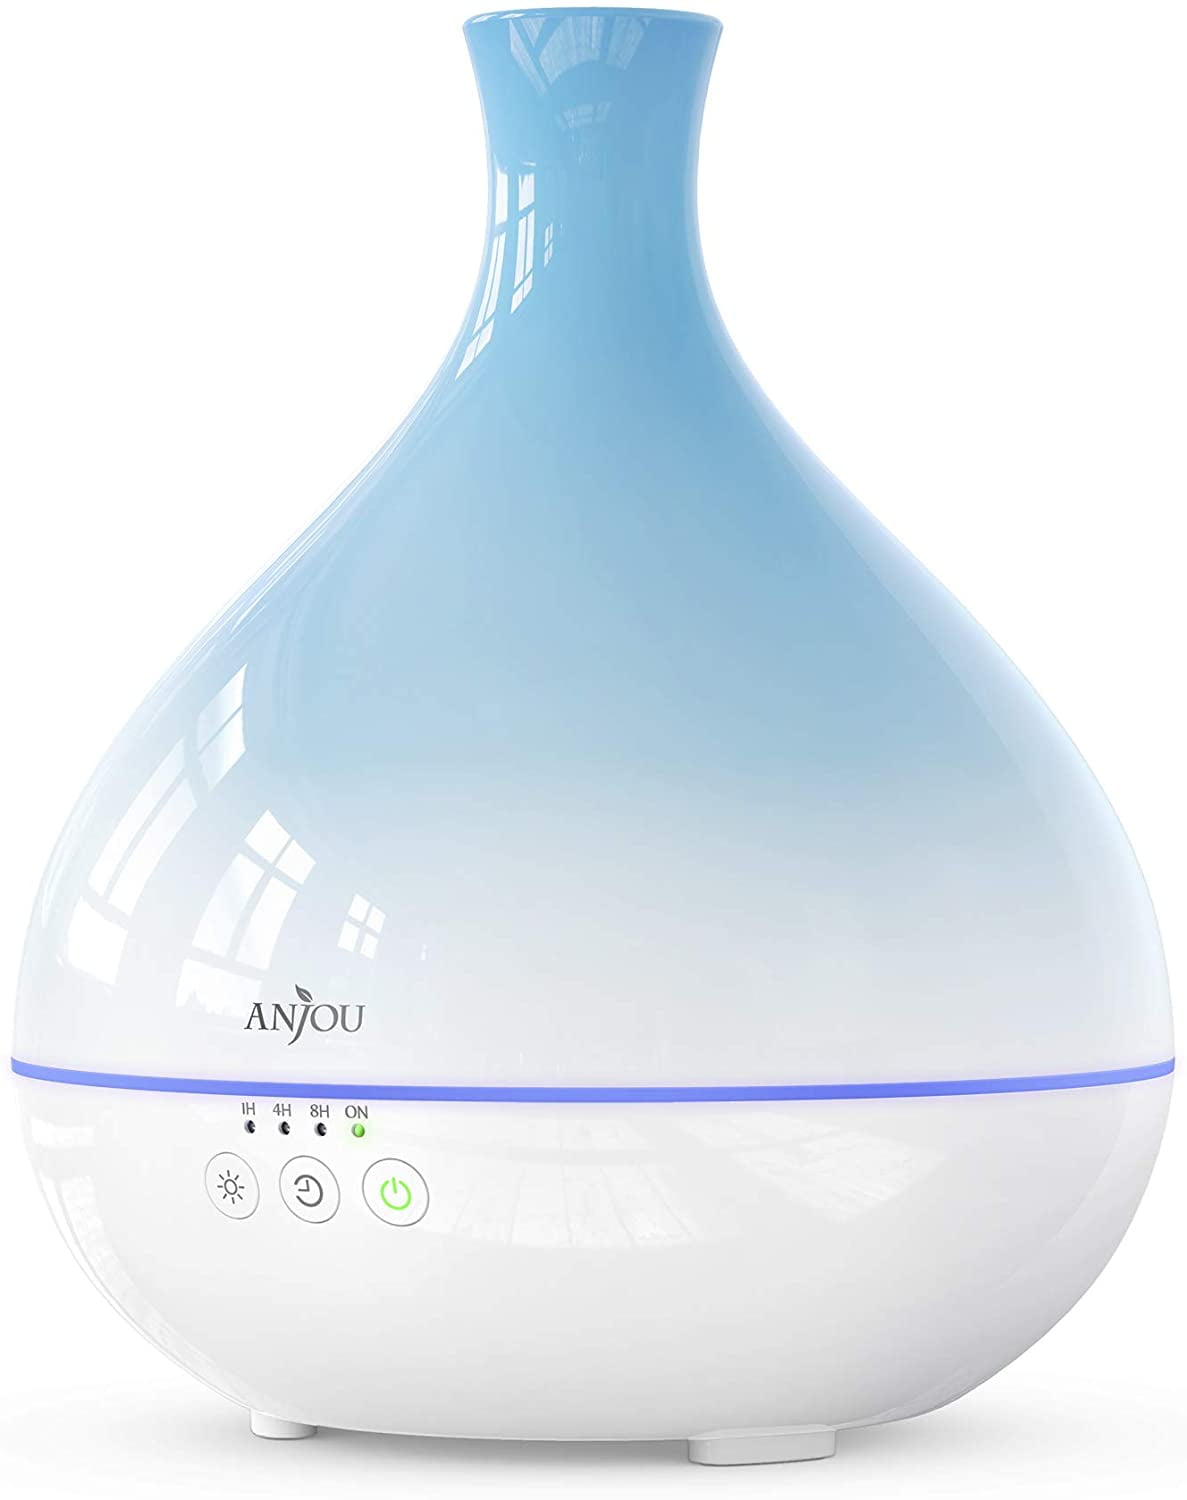 500ml 7 LED Humidifier Air Atomizer Aroma Essential Oil Diffuser Aromatherapy RF 